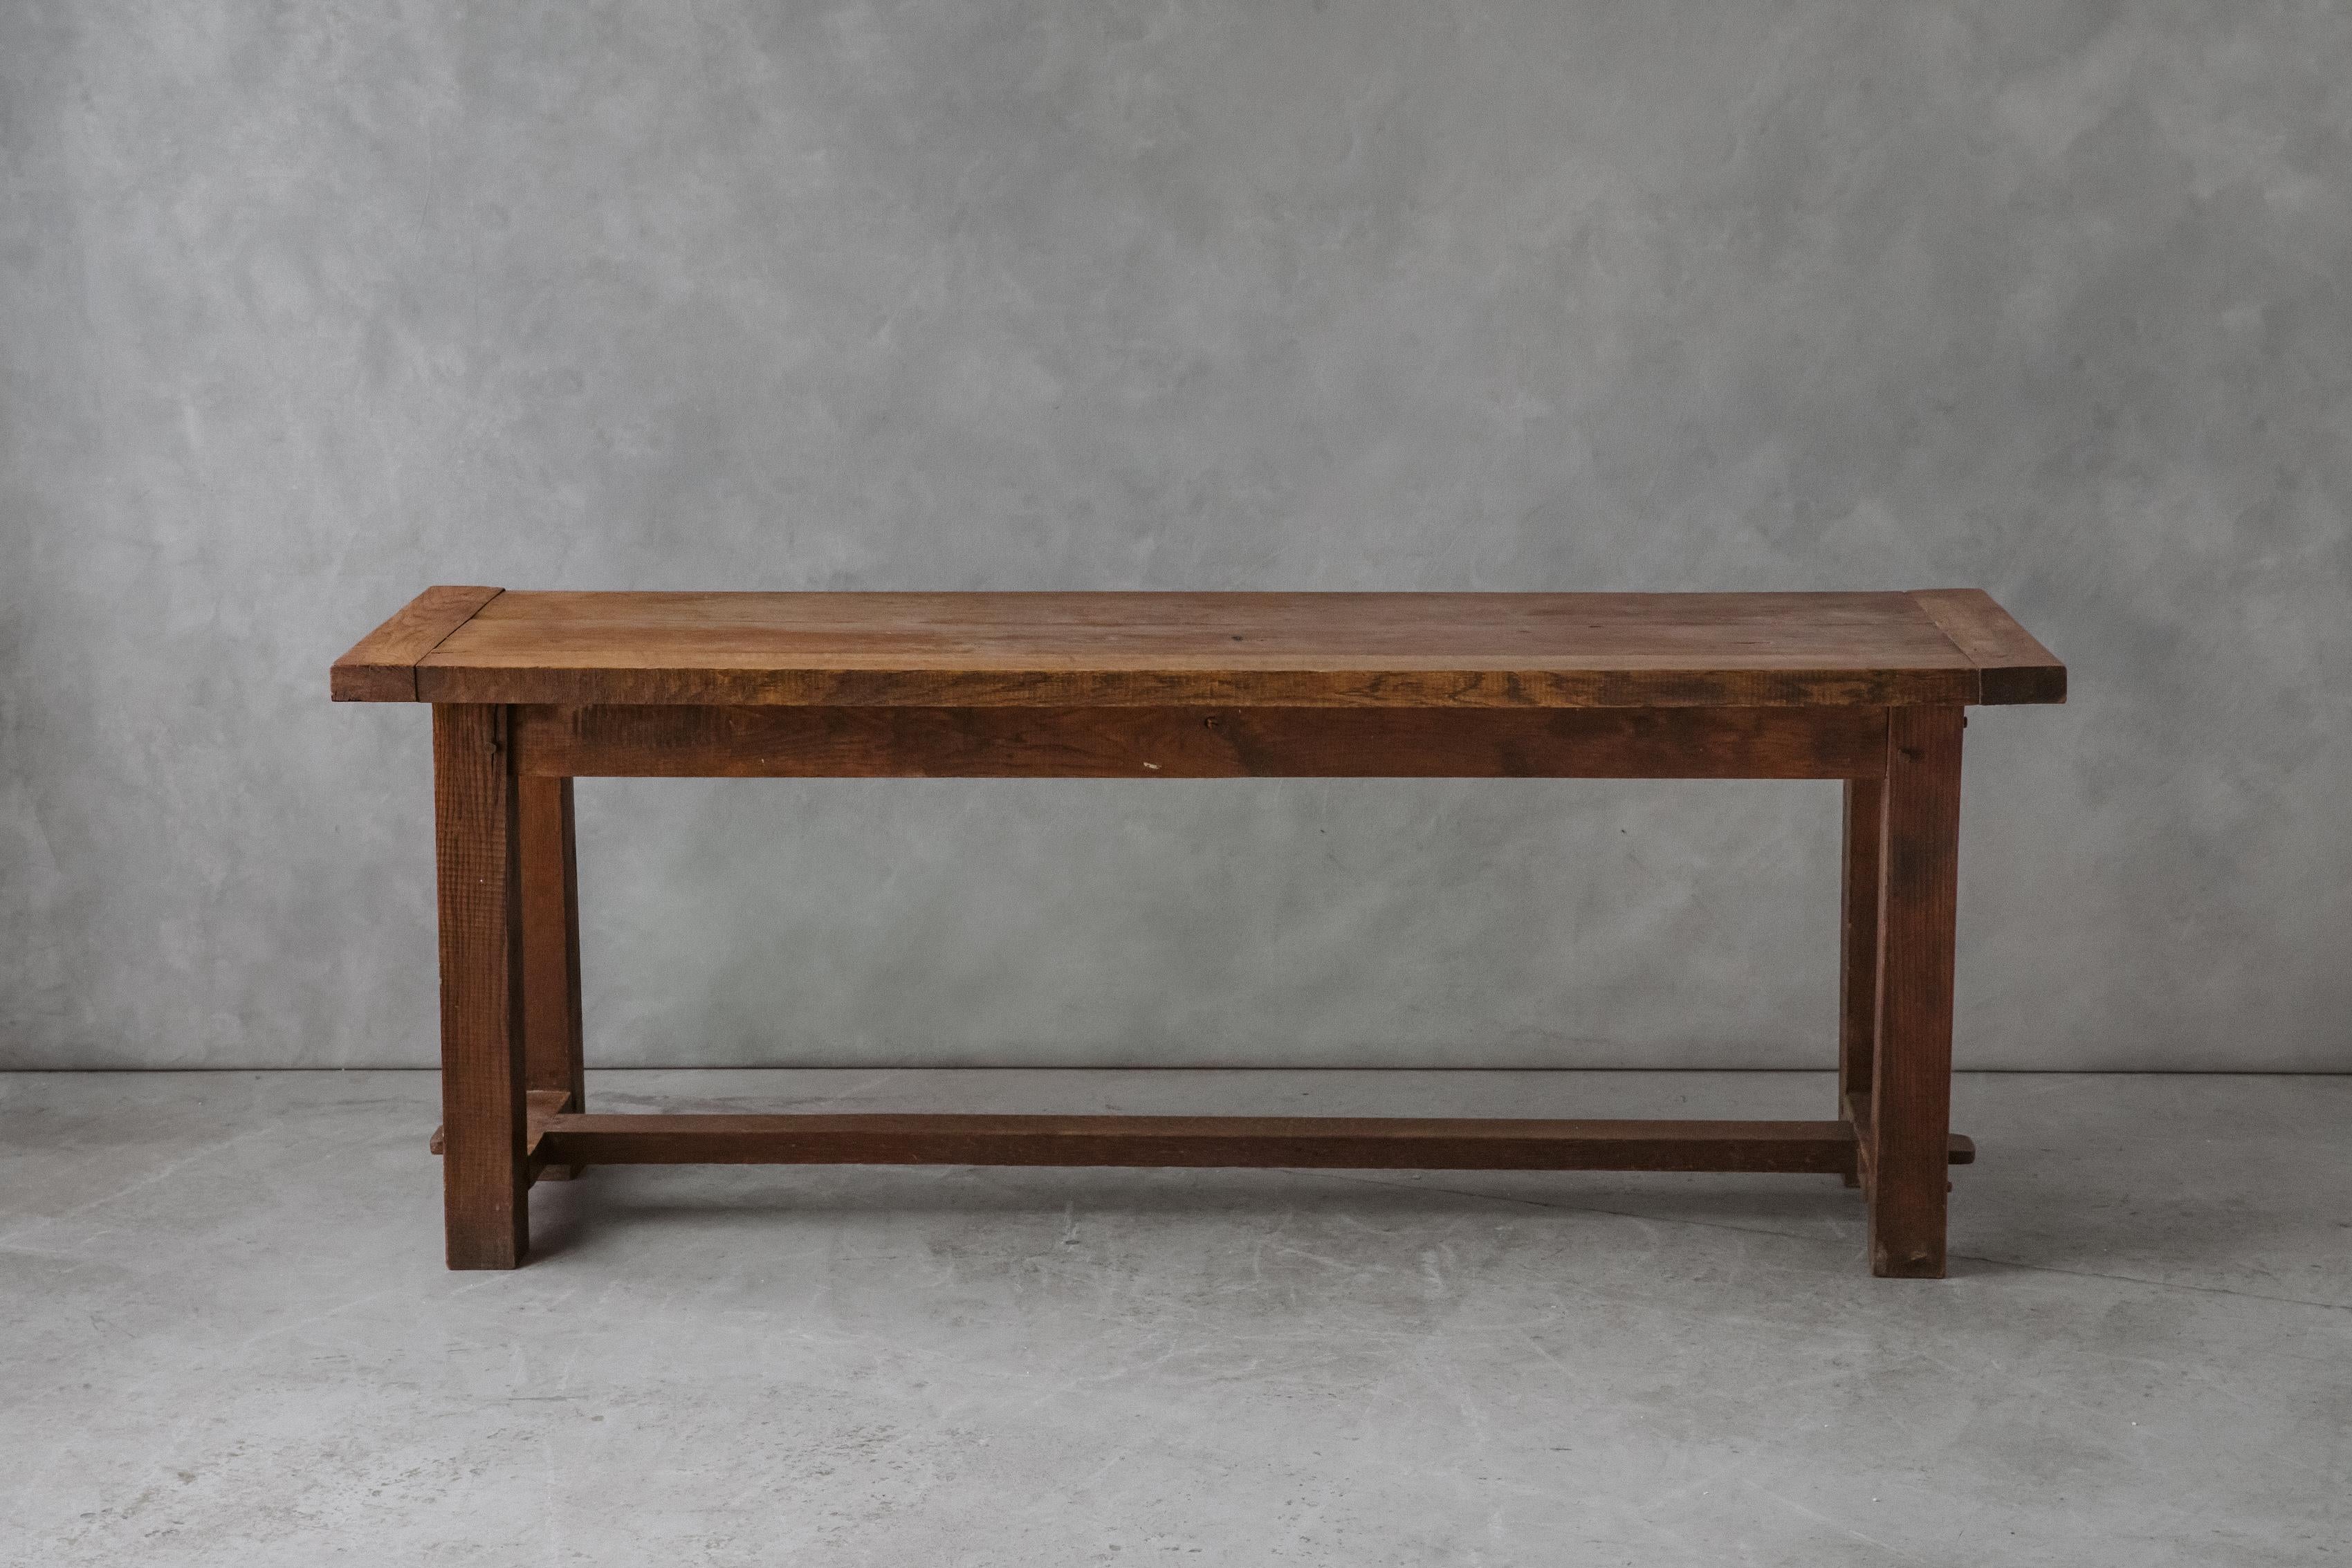 Vintage Oak console table from France, circa 1960. Solid oak construction with nice wear and use. 

We prefer to speak directly with our clients. So, If you have any questions or would like to know more please give us a call or drop us a line. We